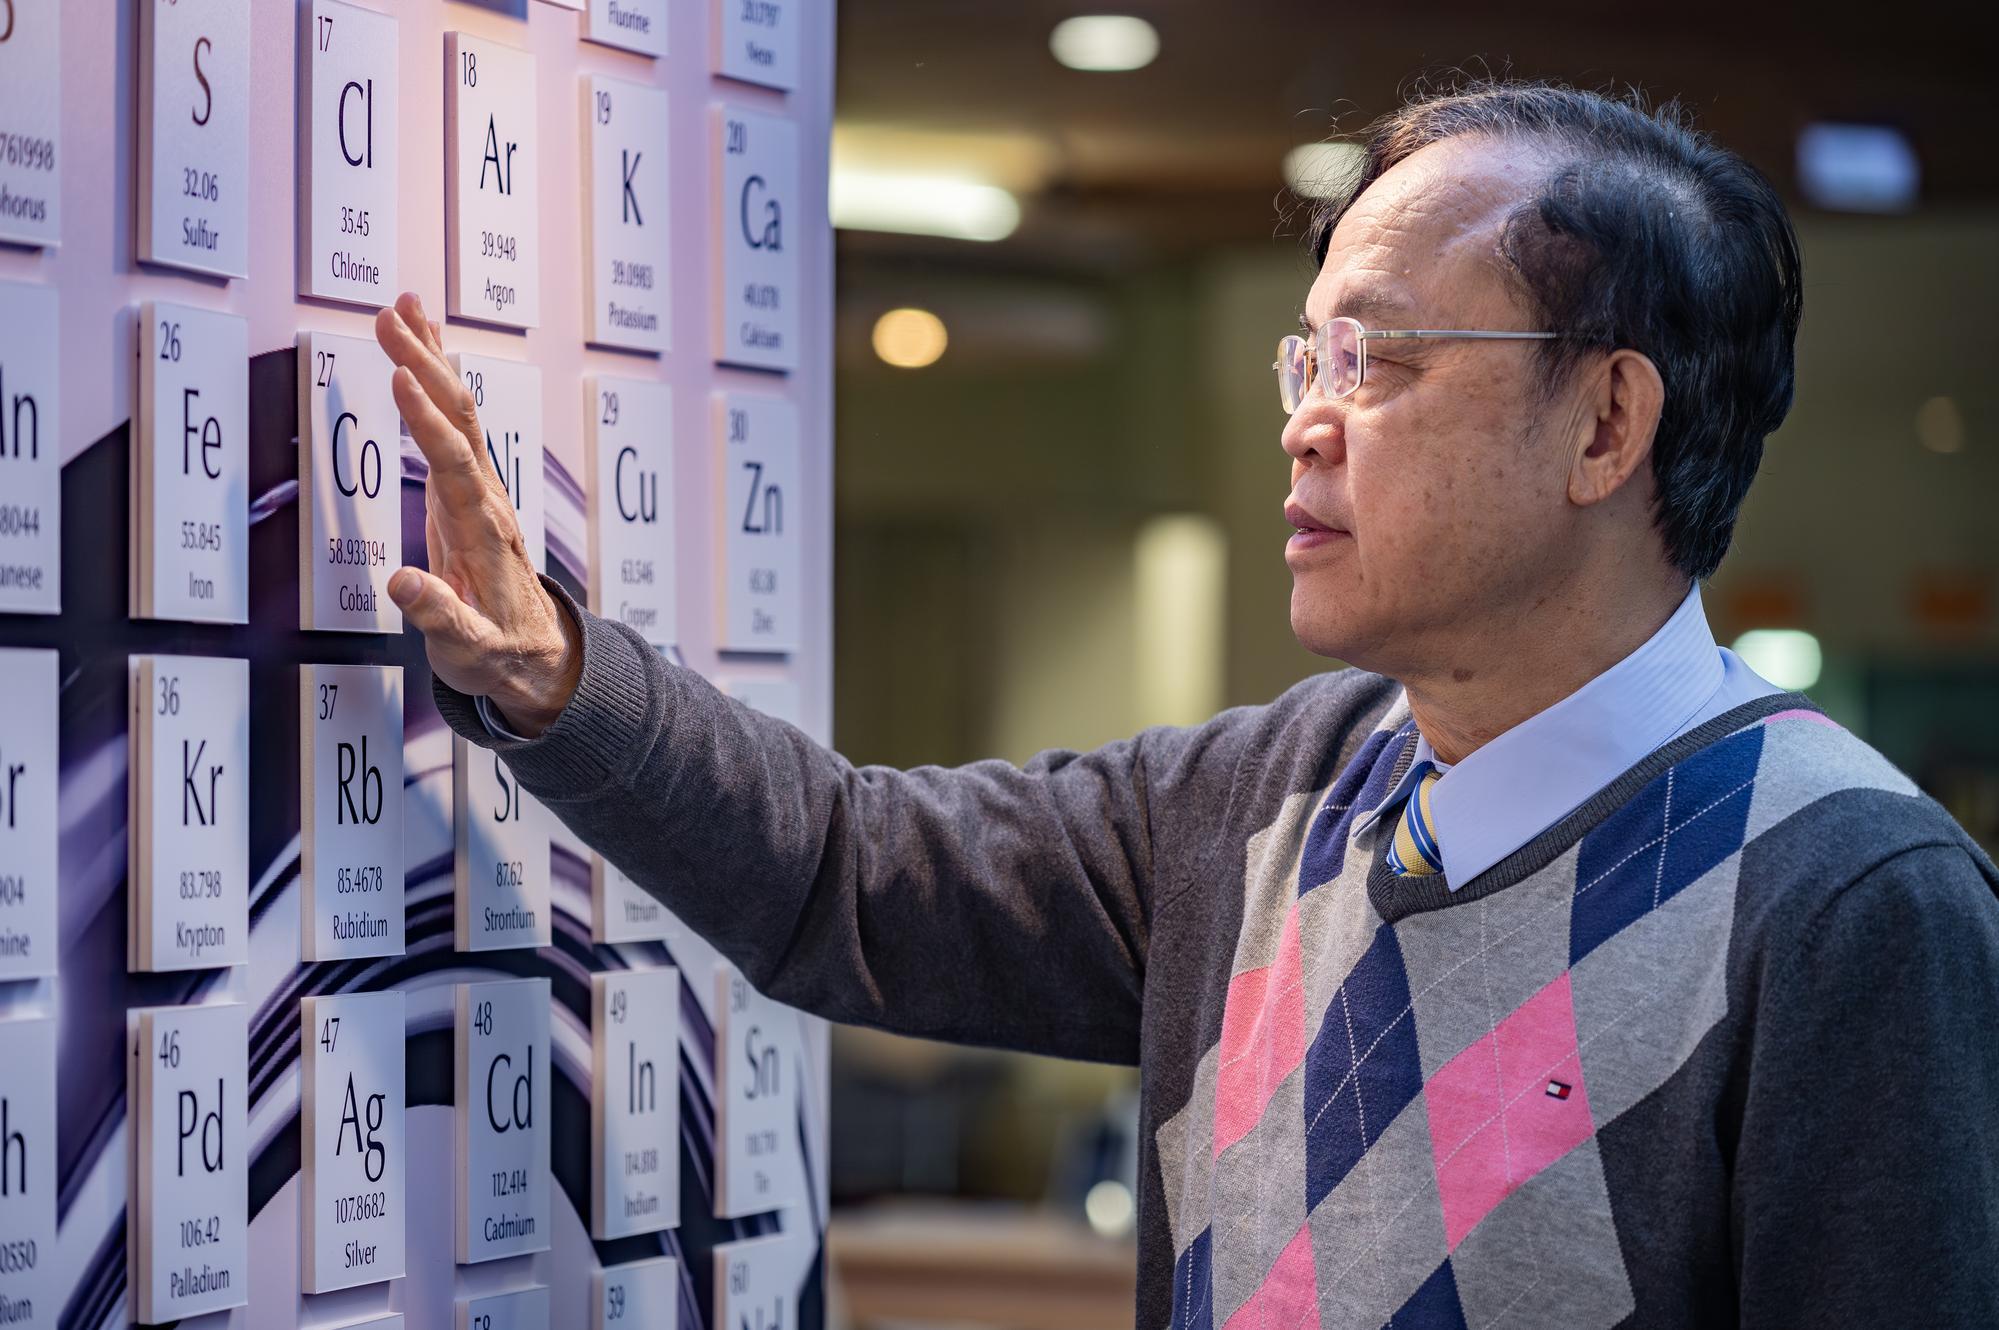 Chair Professor Jien-Wei Yeh (葉均蔚) from NTHU's Materials Science and Engineering pioneered a groundbreaking field known as “Metal Mixology.”